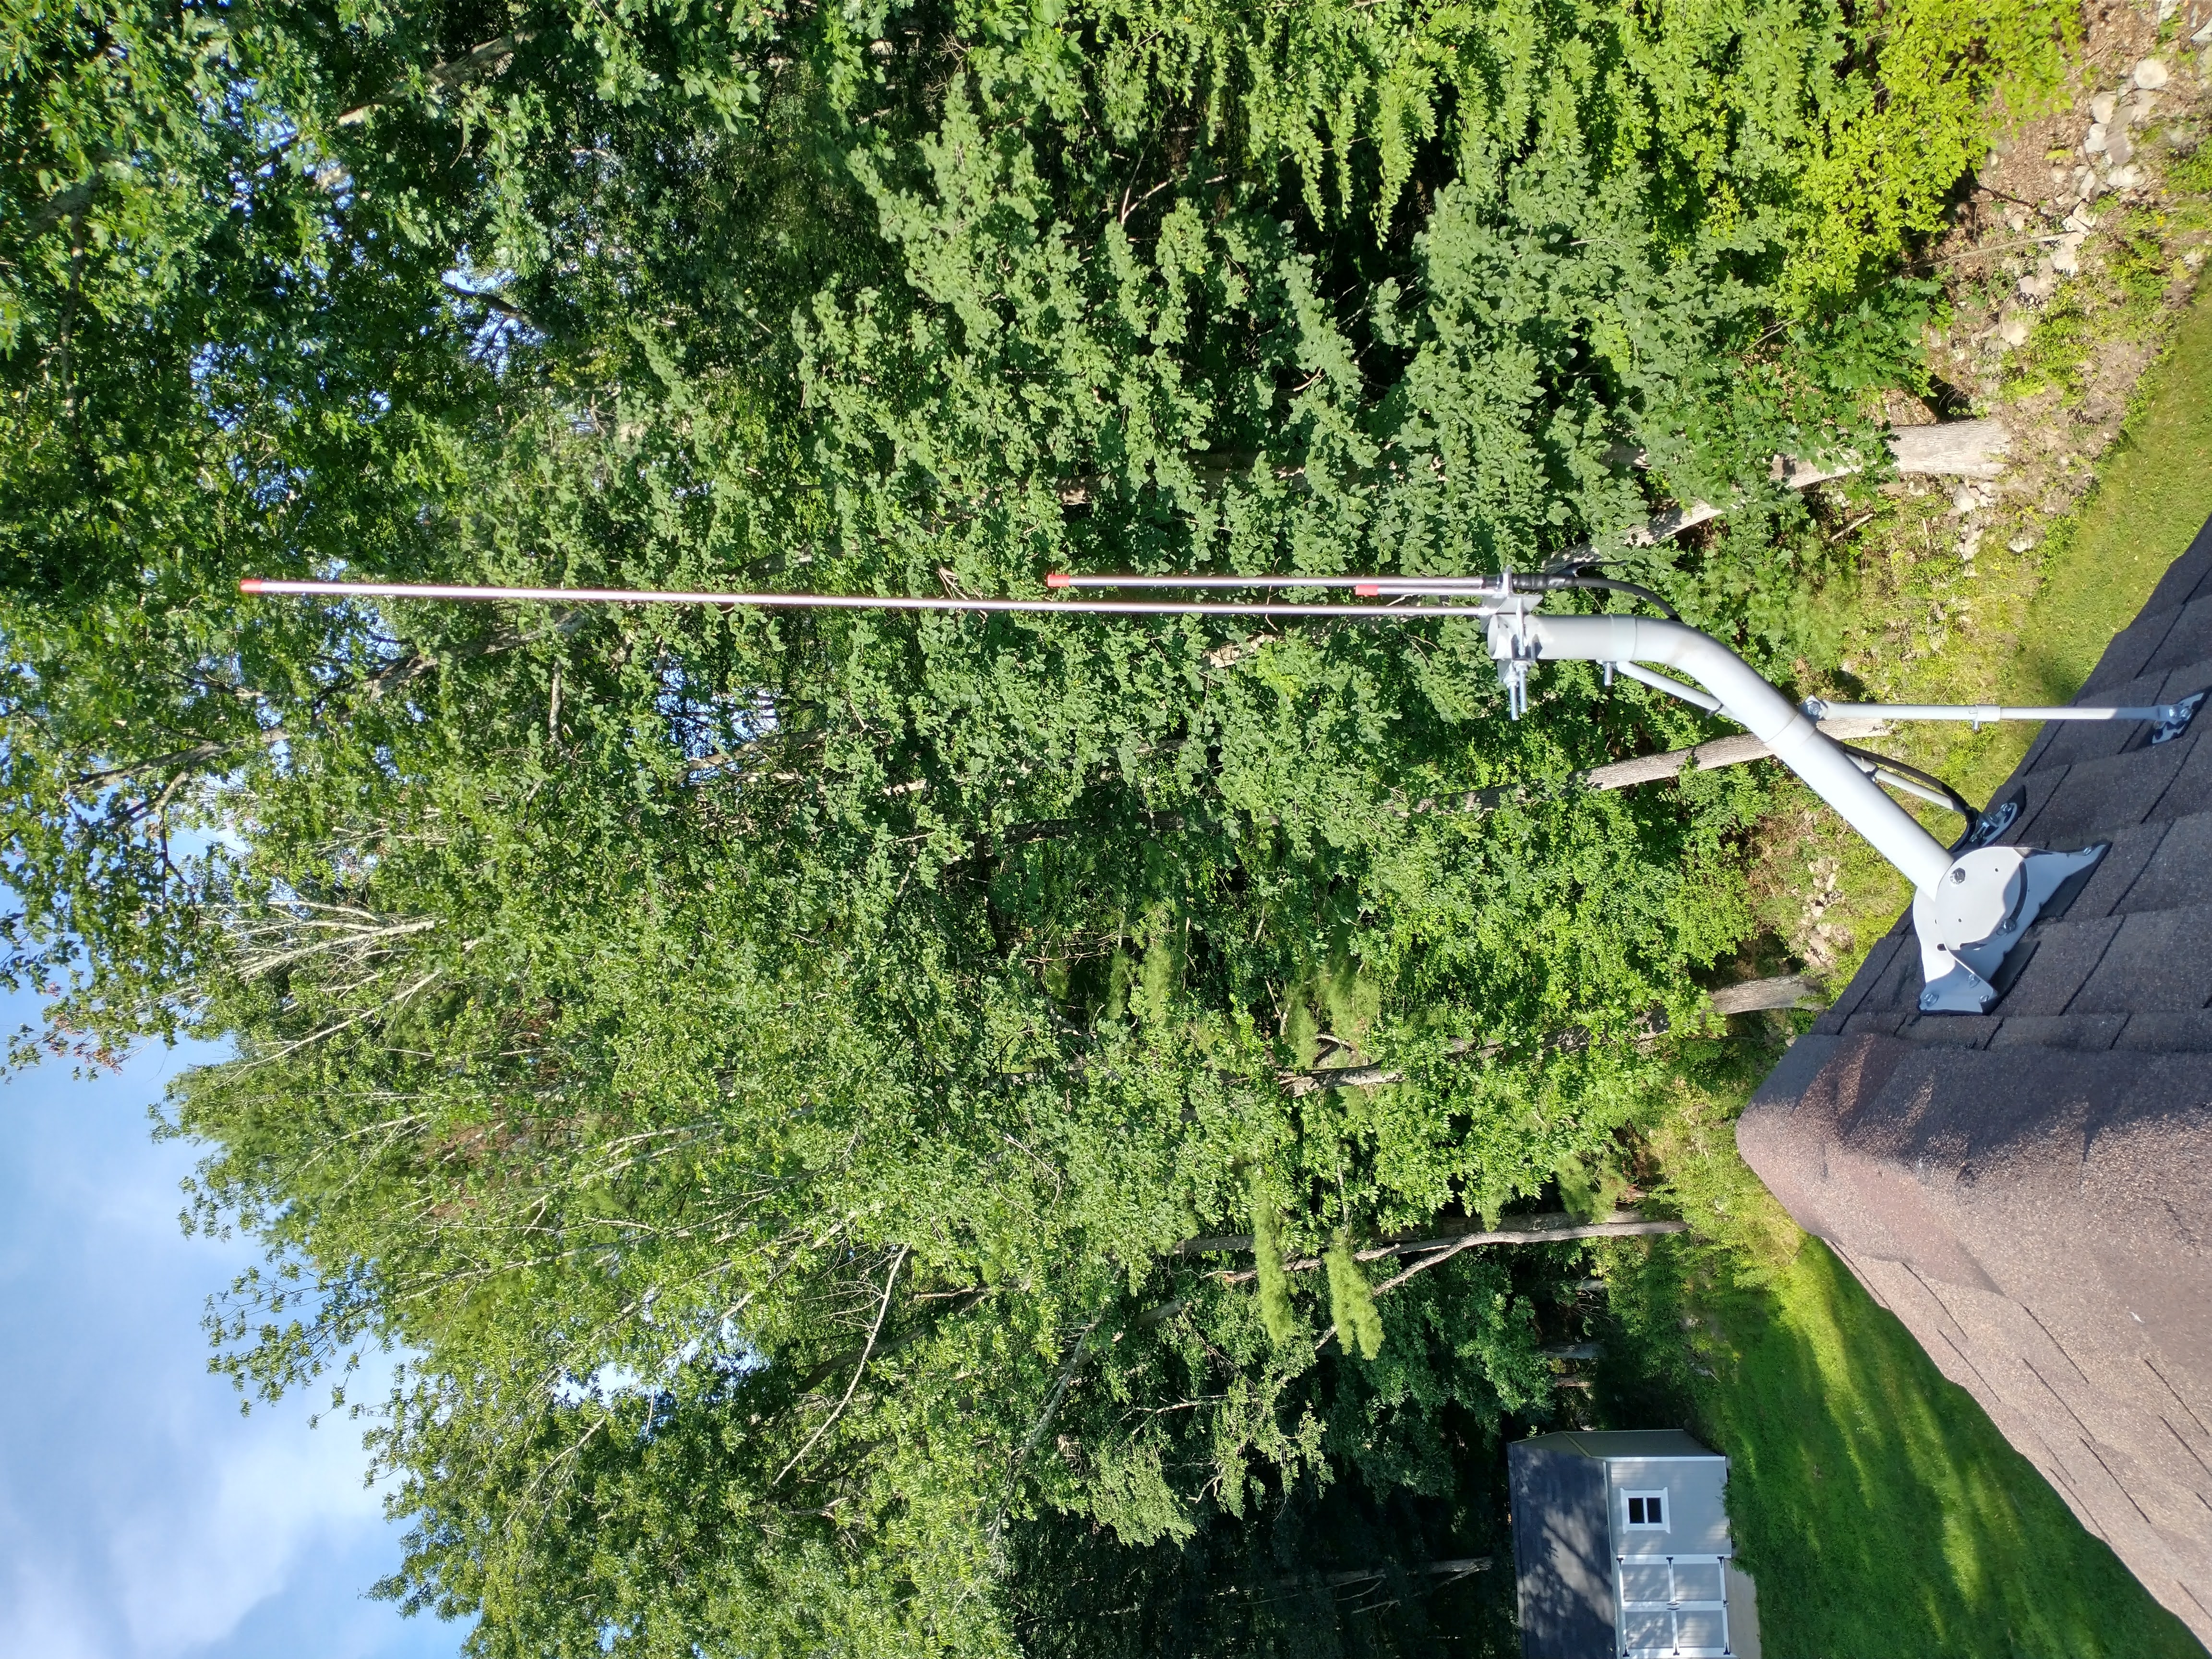 Figure 1. Antenna installed on the roof.